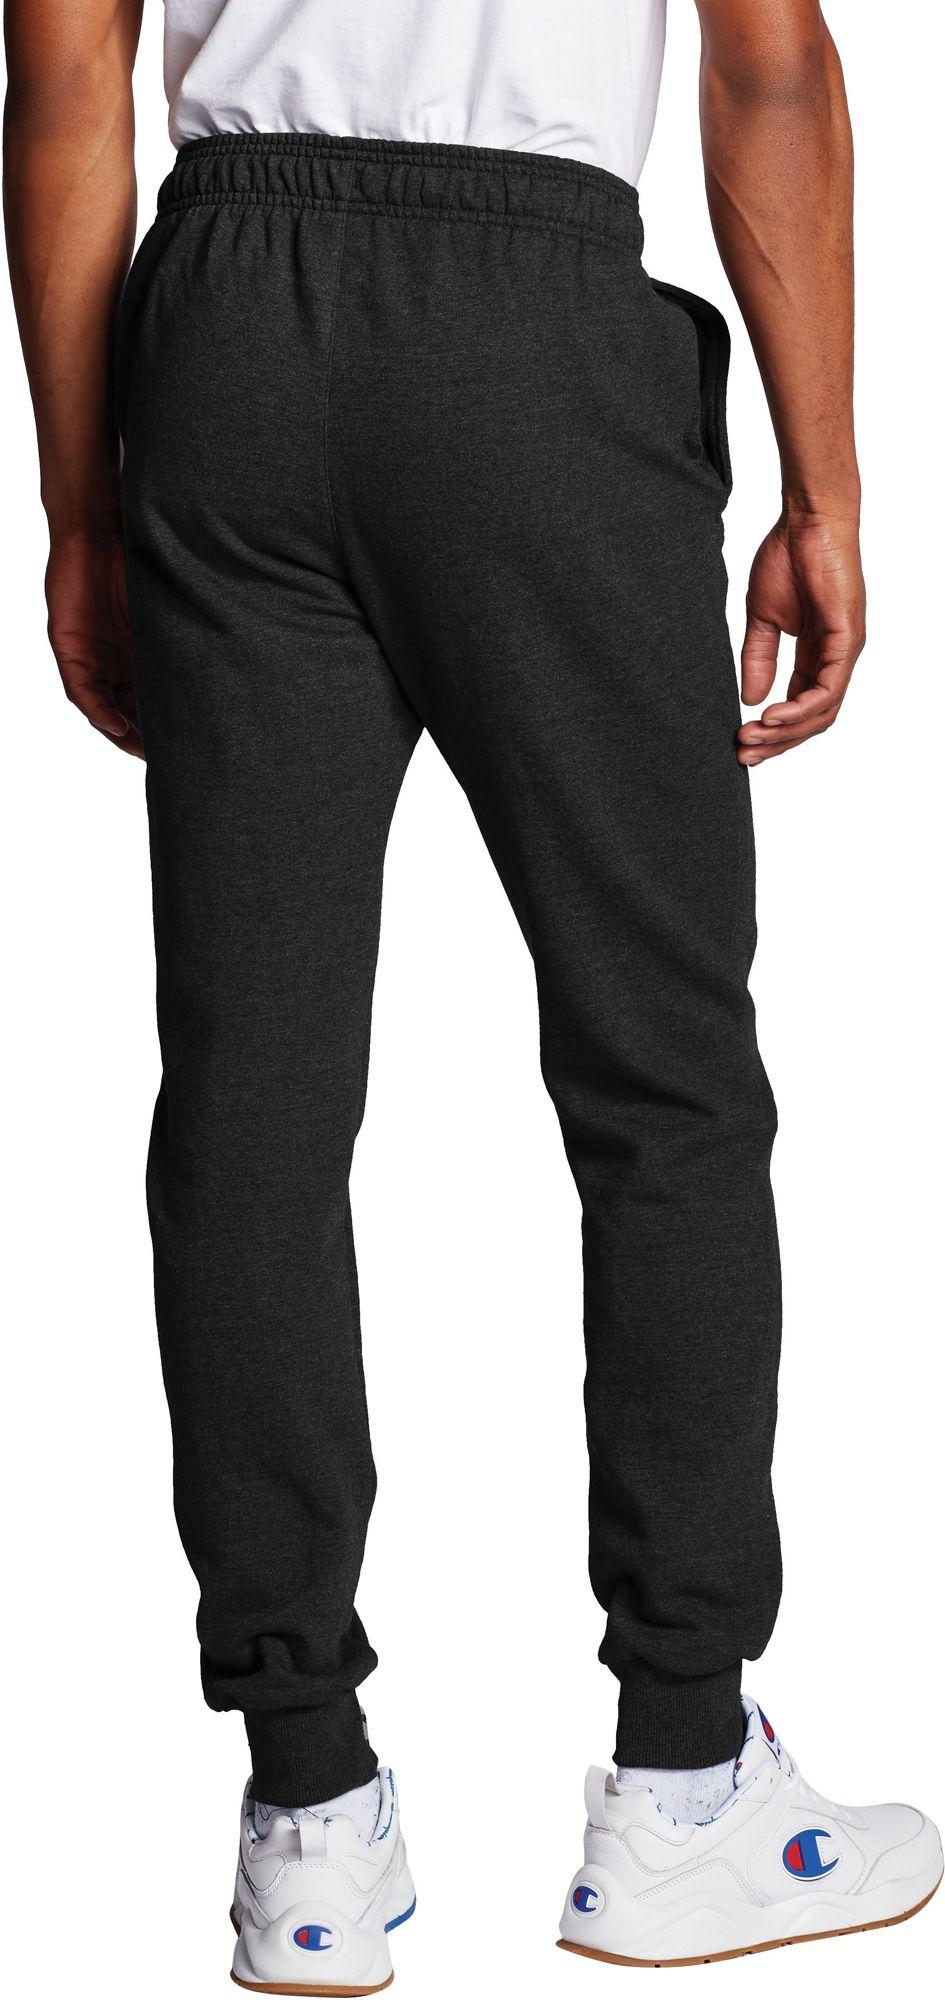 Champion Powerblend Graphic Jogger Pants in Black for Men - Lyst